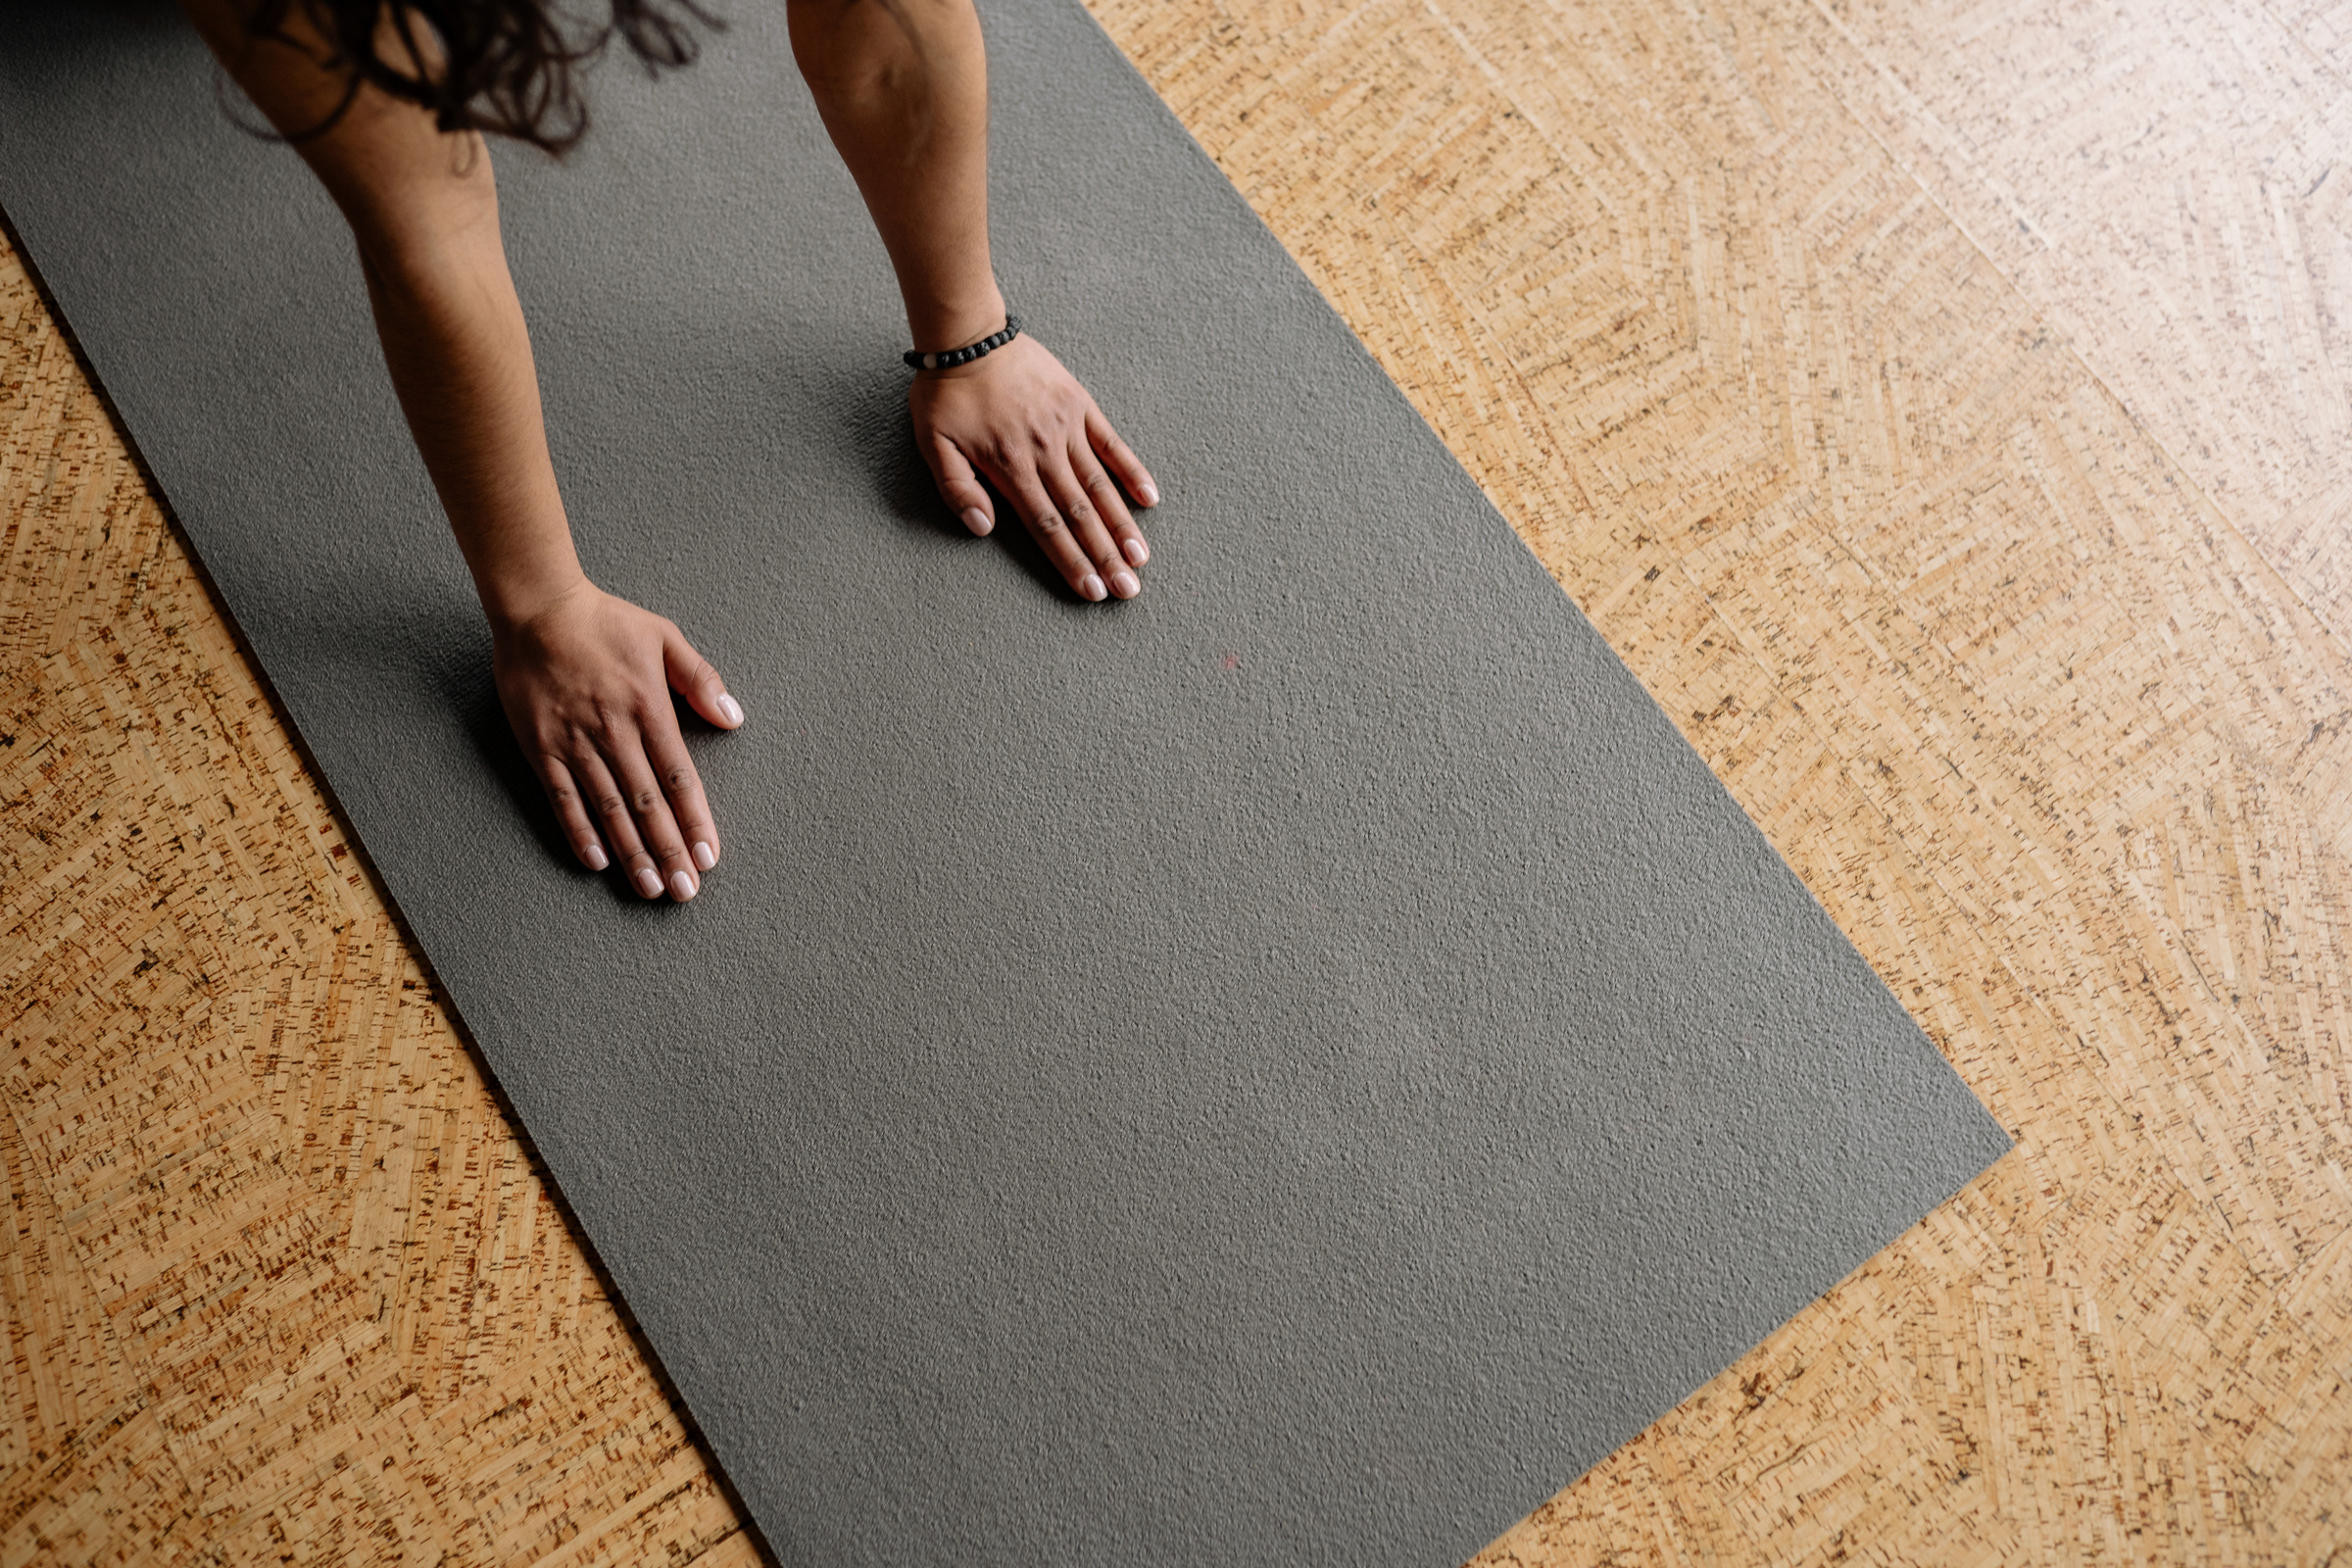 Hands of a Person on a Yoga Mat